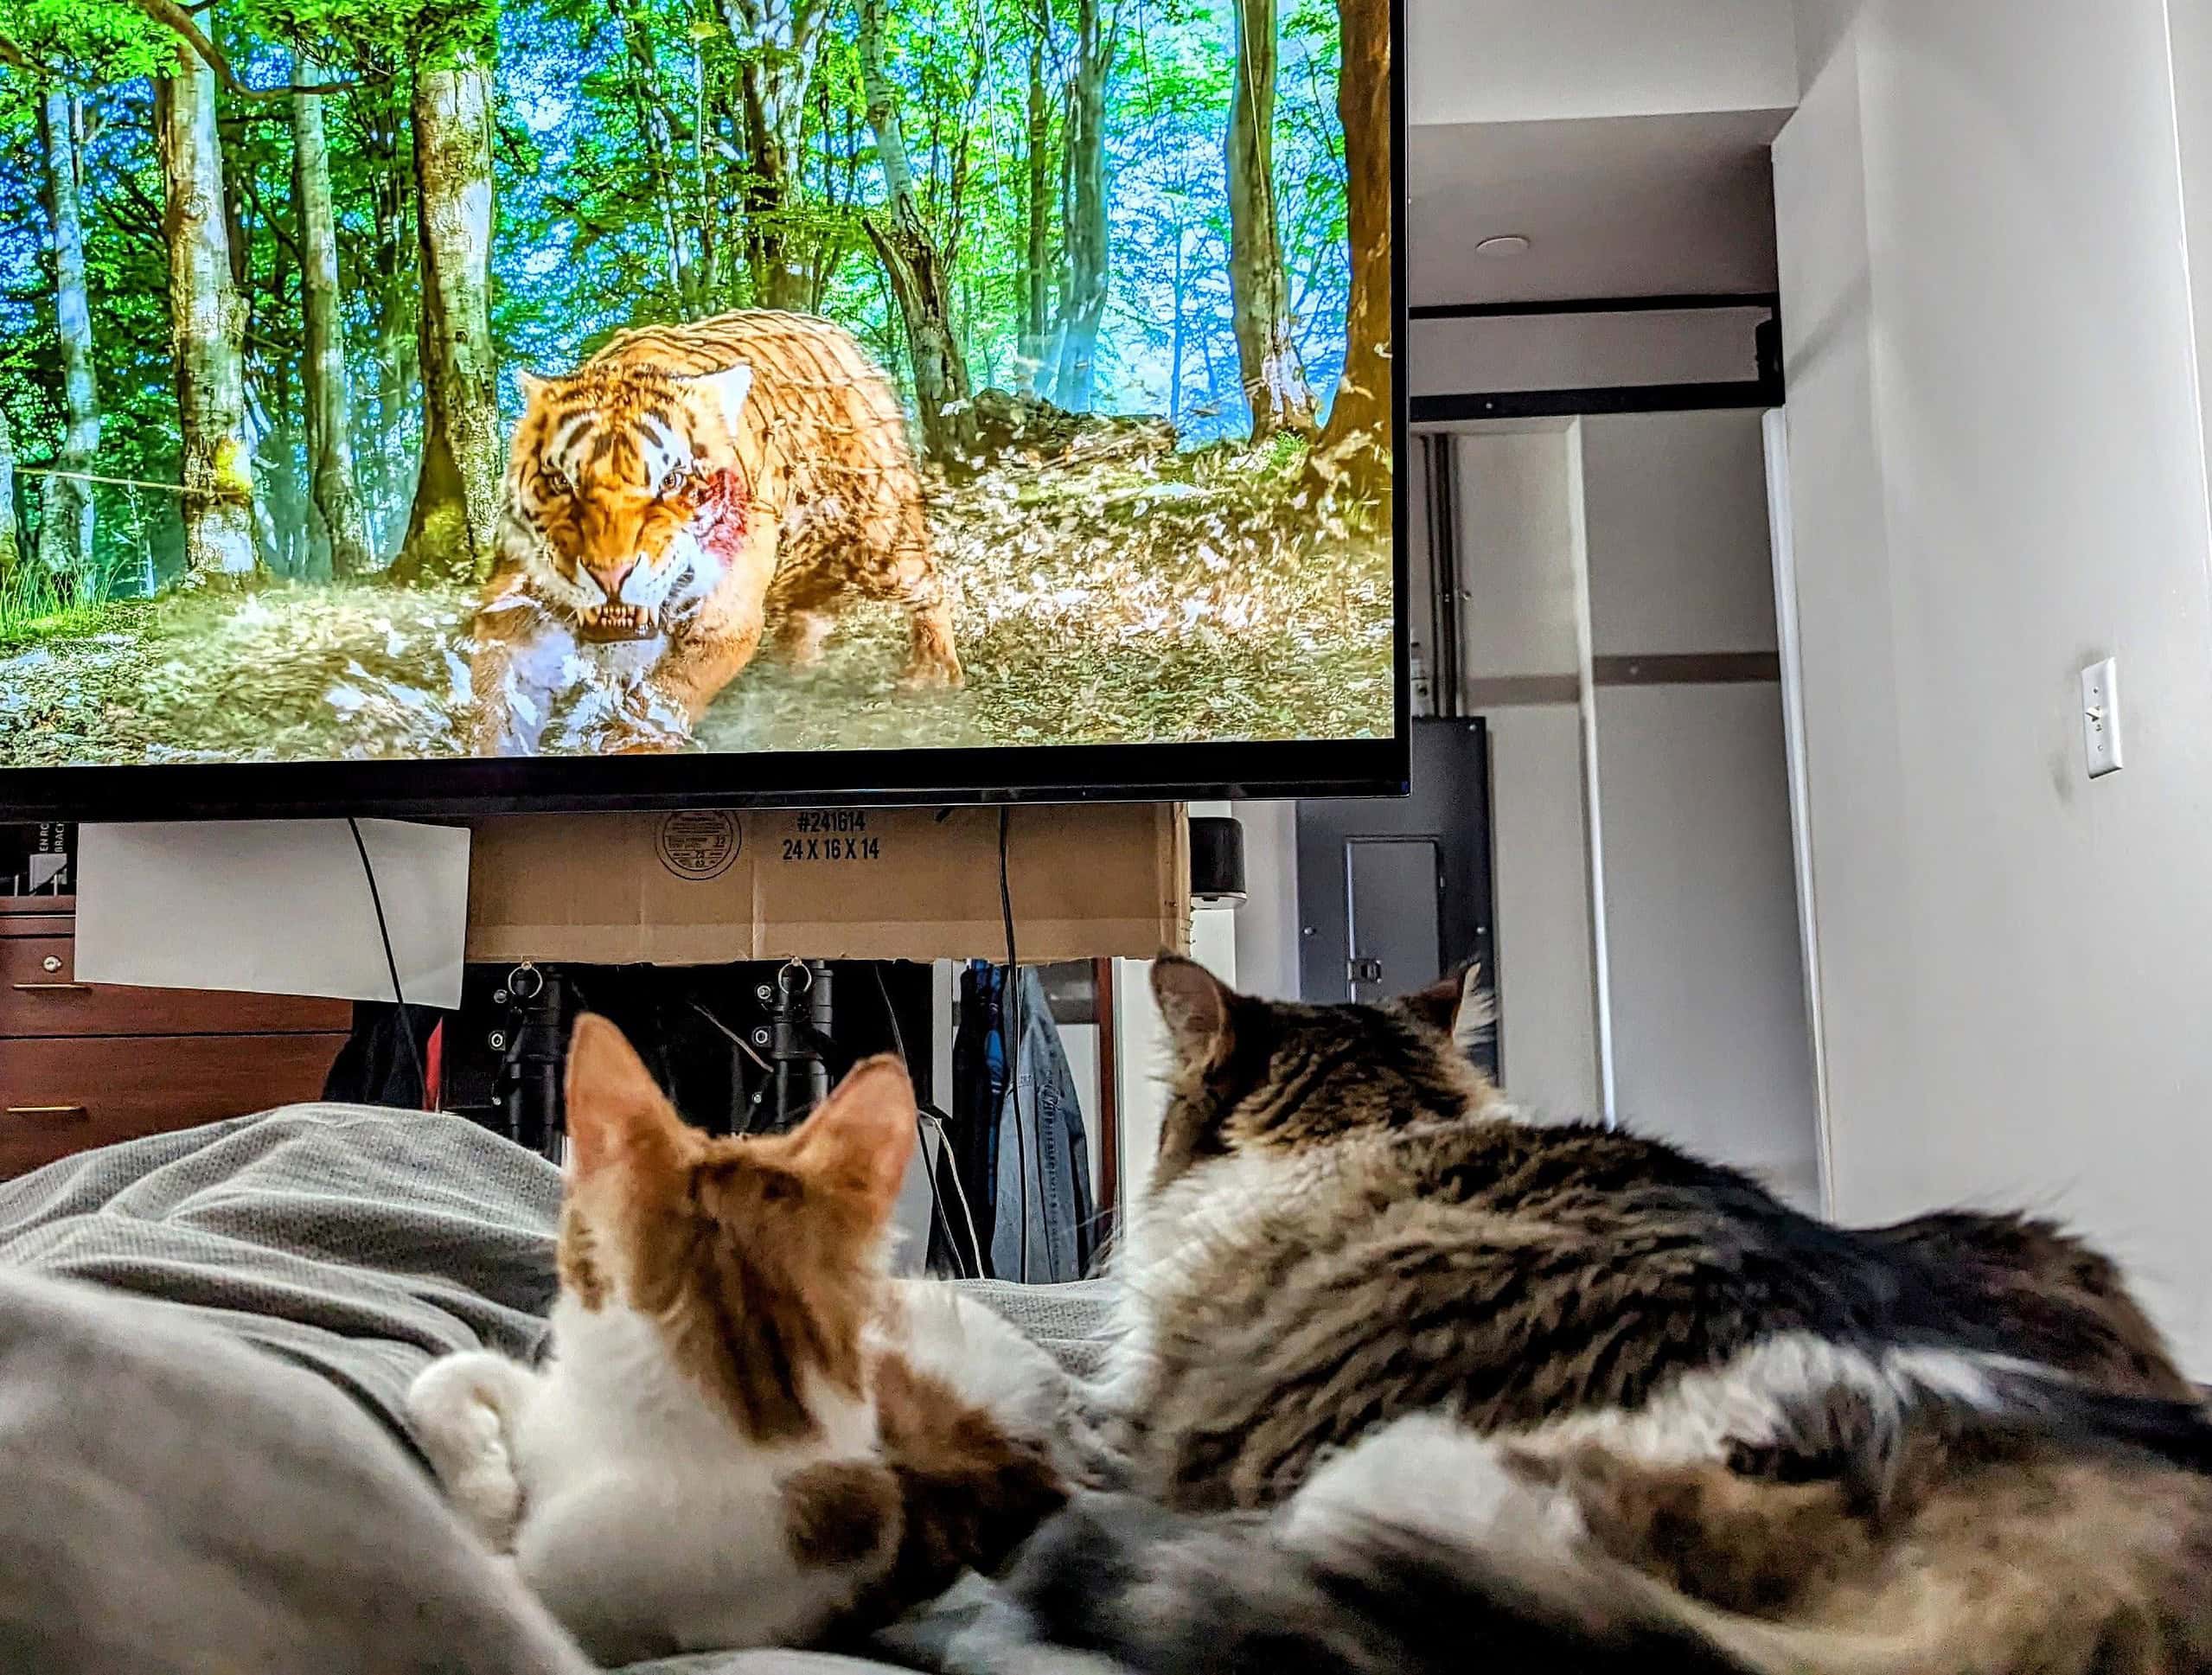 Why Your Cat is Hooked on Watching TV